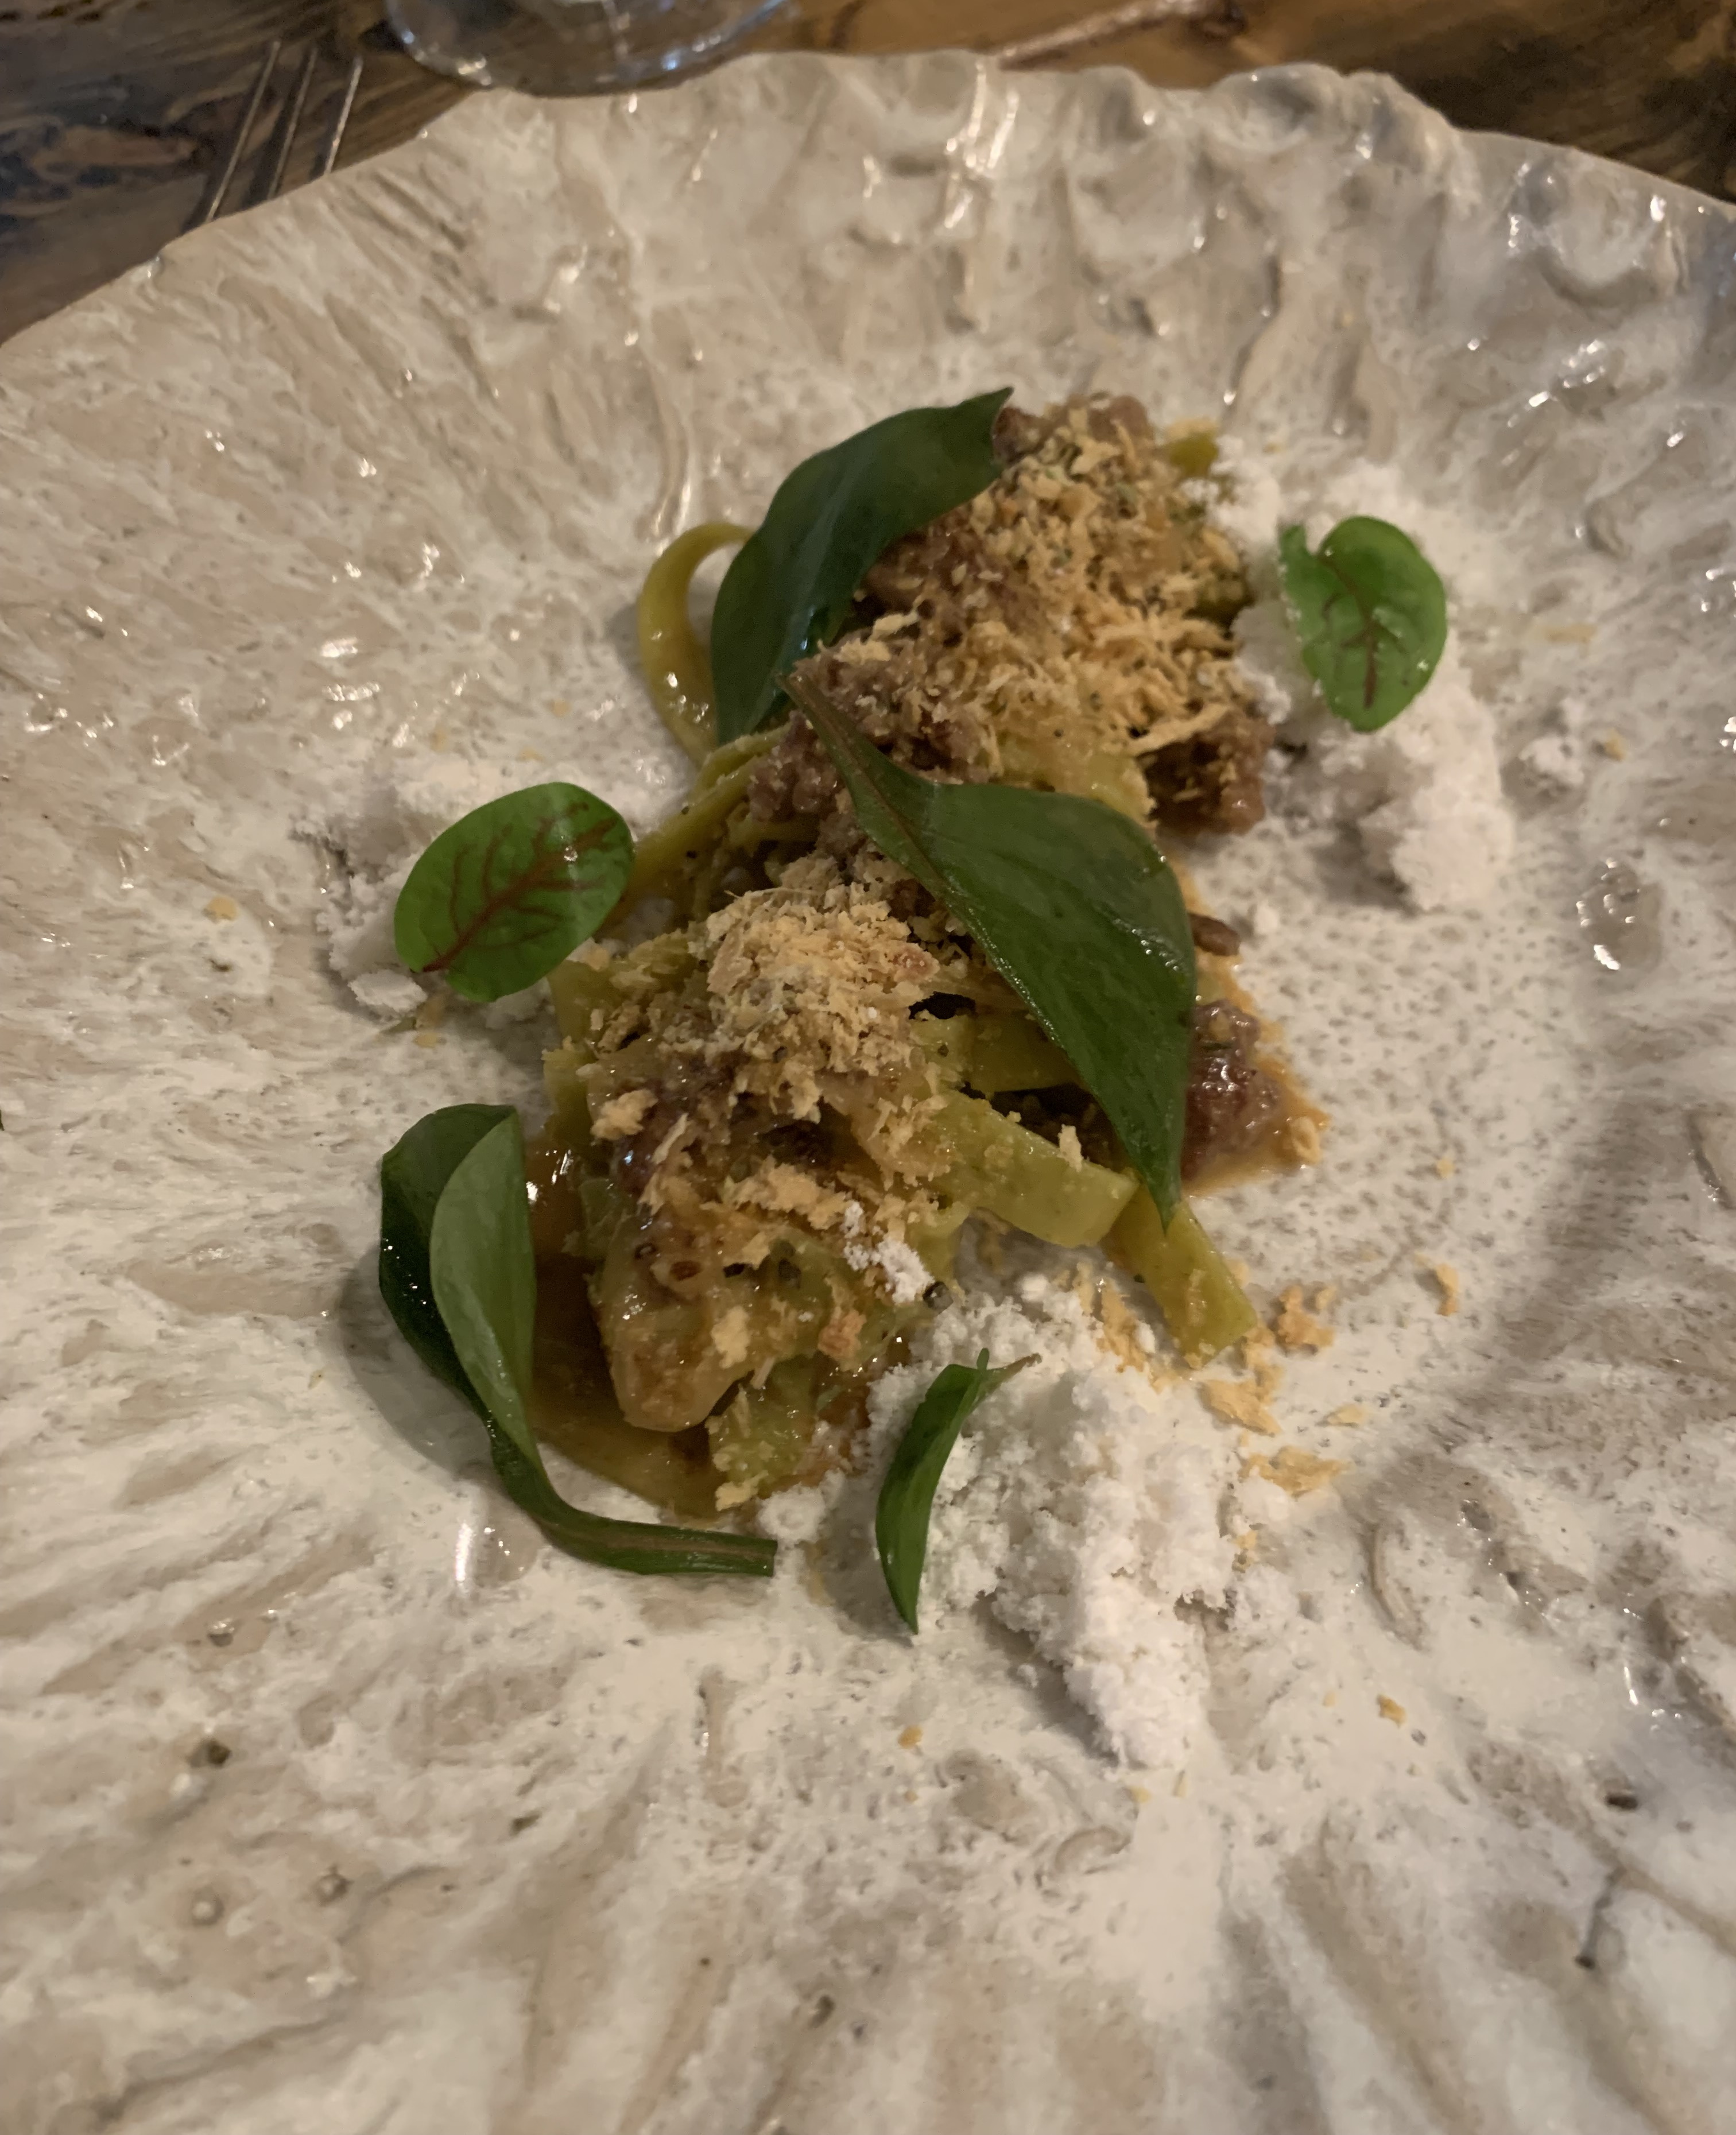 Tightly-coiled thin noodles, green in hue, served covered in crunchy bits, and garnished with beautiful green leaves. There are dark chunks of lamb sausage peeking out from underneath everything.